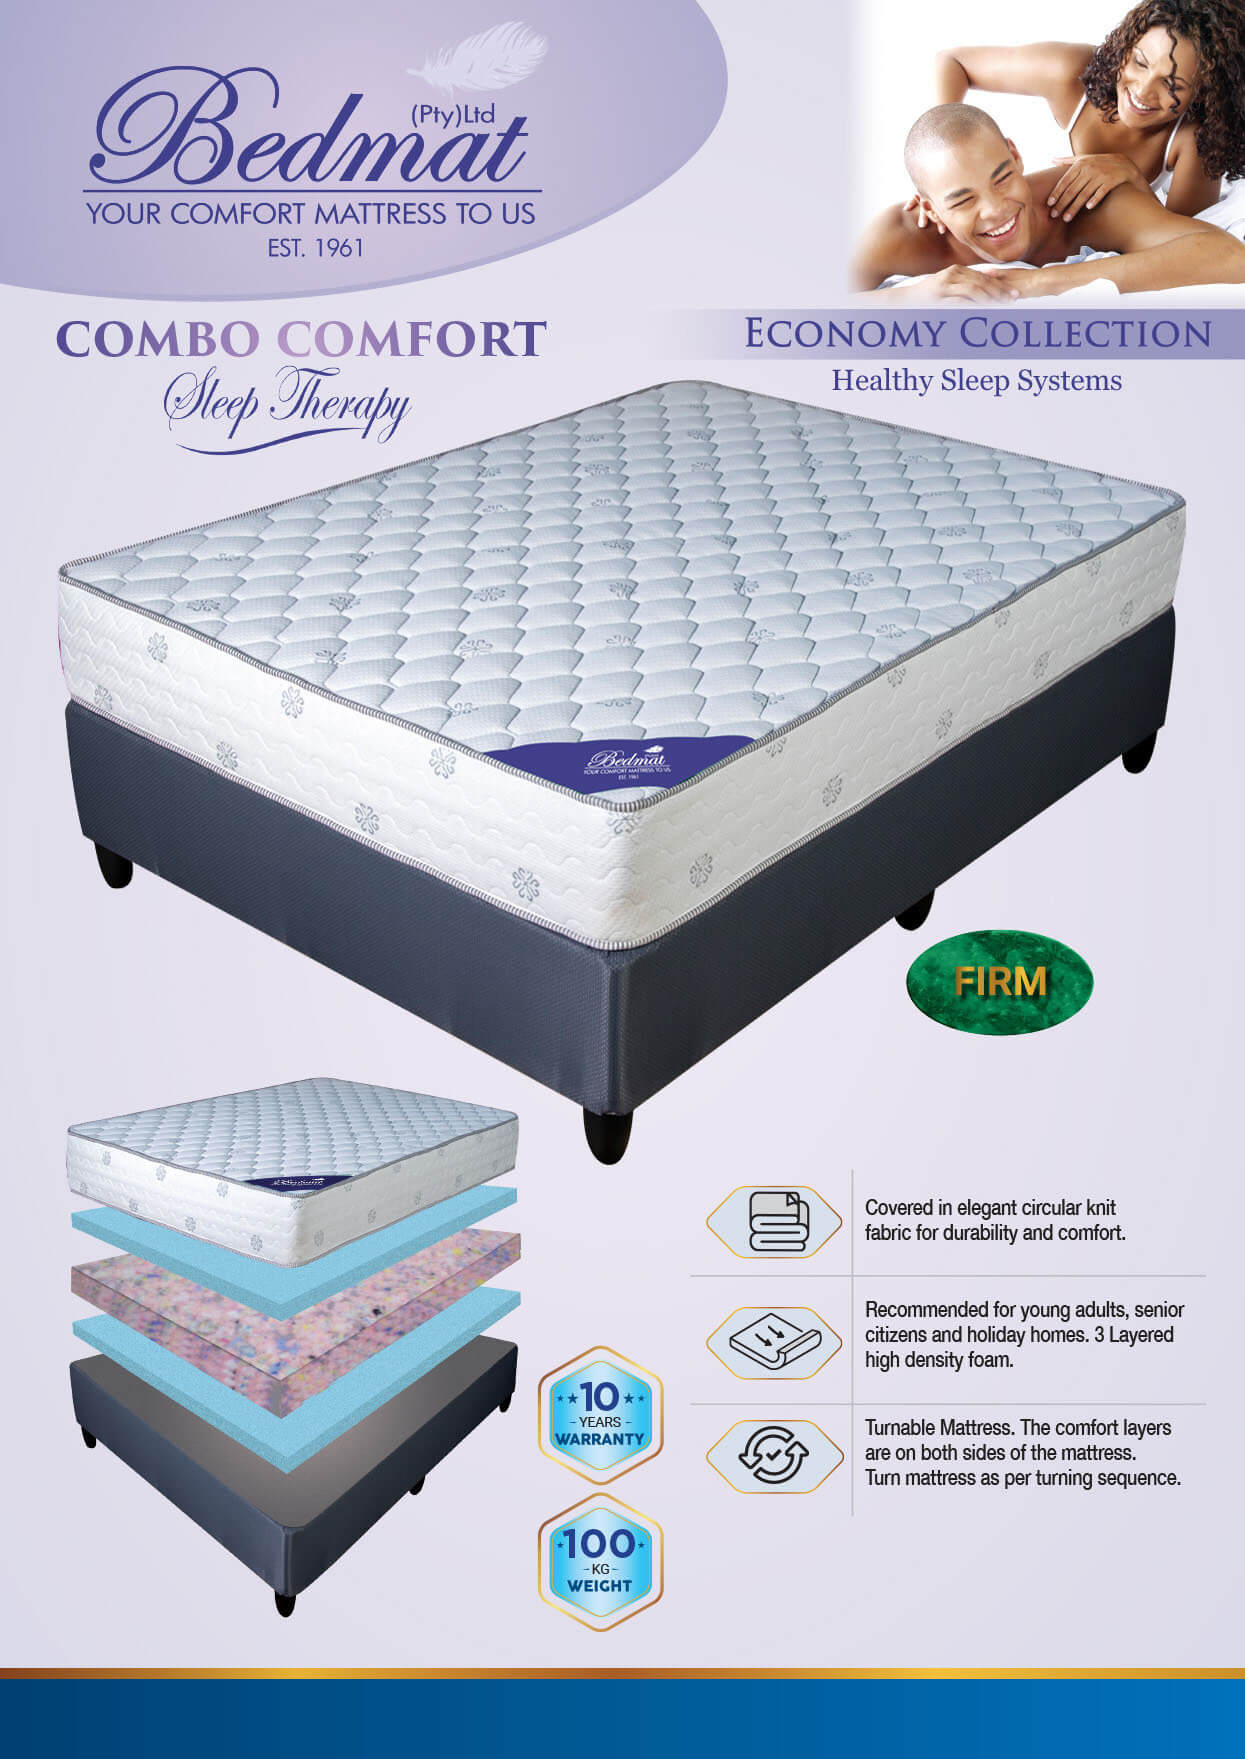 Combo Comfort mattress and base and details